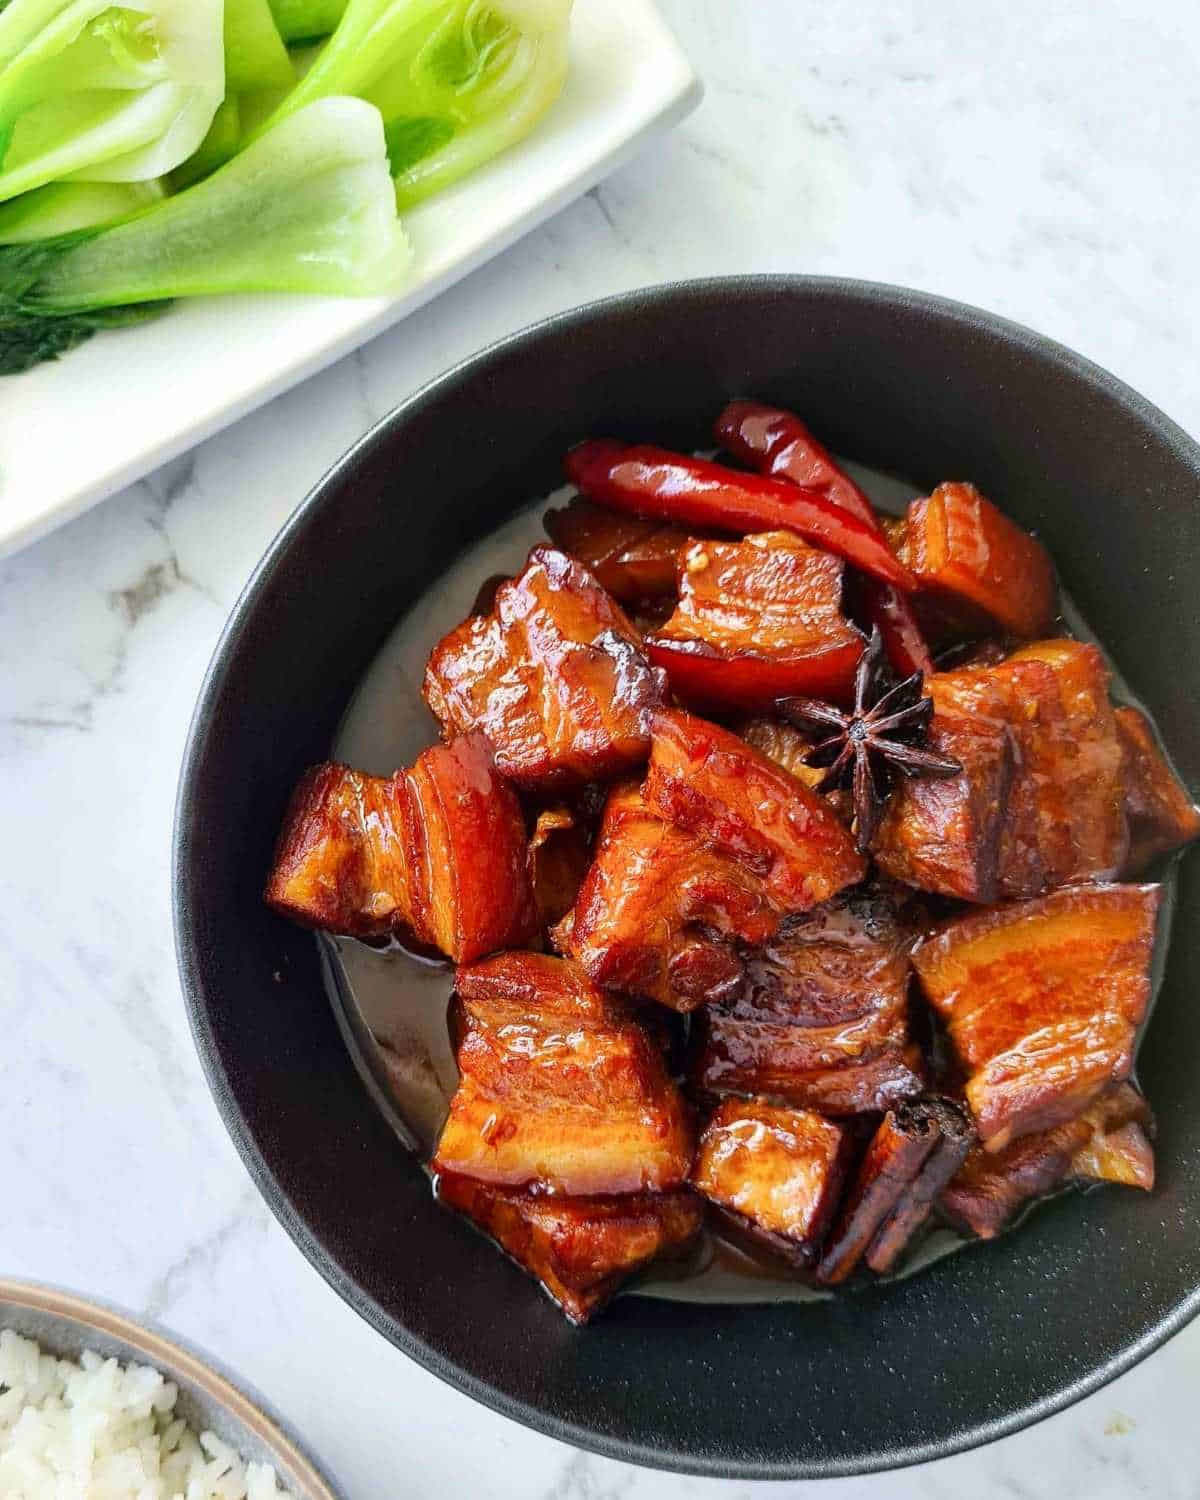 Pork belly with sauce in a large black bowl